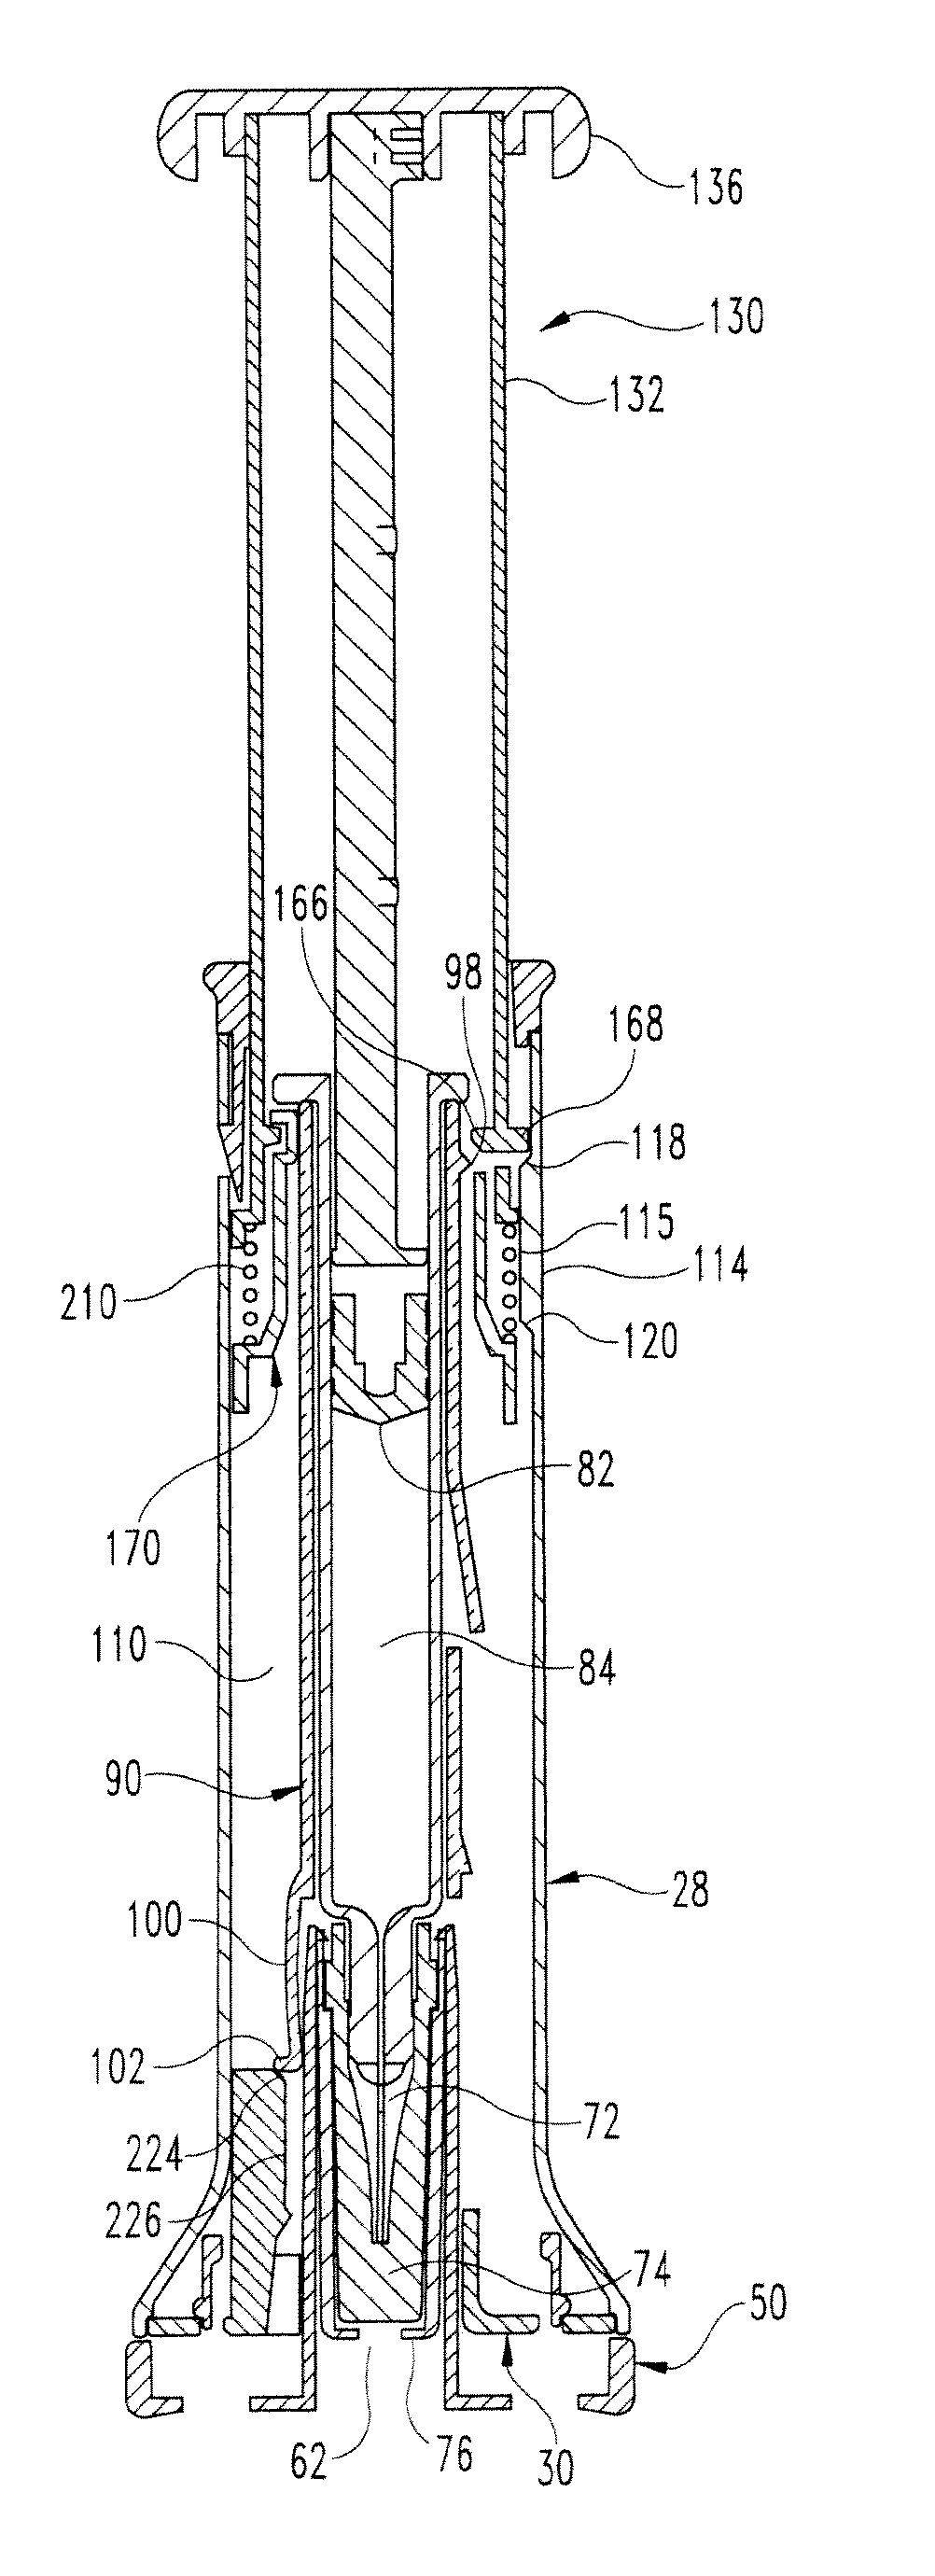 Apparatus for Injecting a Pharmaceutical with Automatic Syringe Retraction Following Injection